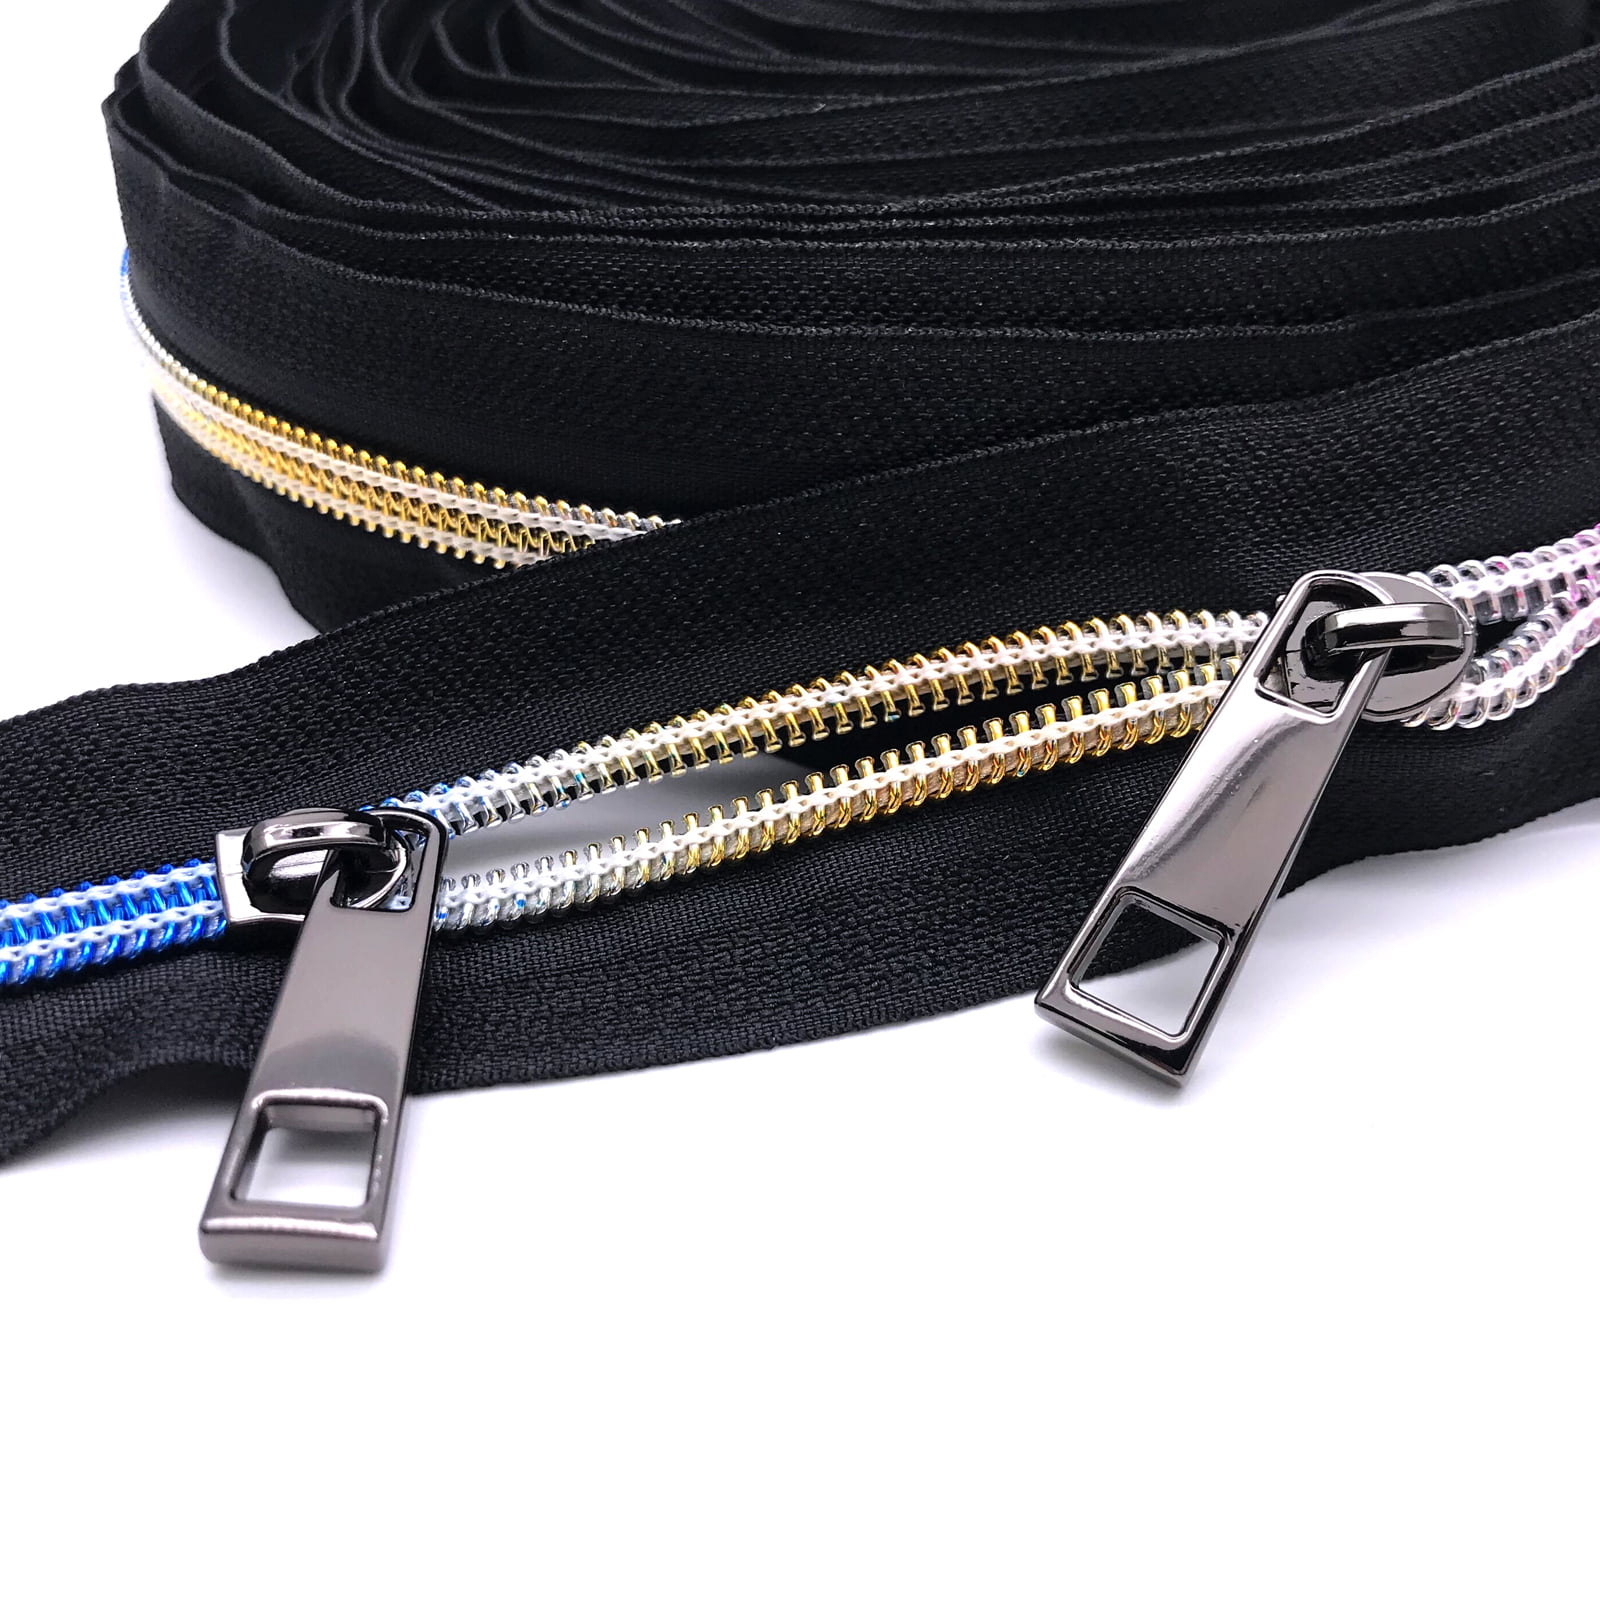 Goyunwell Black Zipper by The Yard #5 Zippers for Sewing with 20pcs  Gunmetal Zipper Pulls 10 Yards Nylon Coil Long Black Zipper Tape for Purse  and Bag